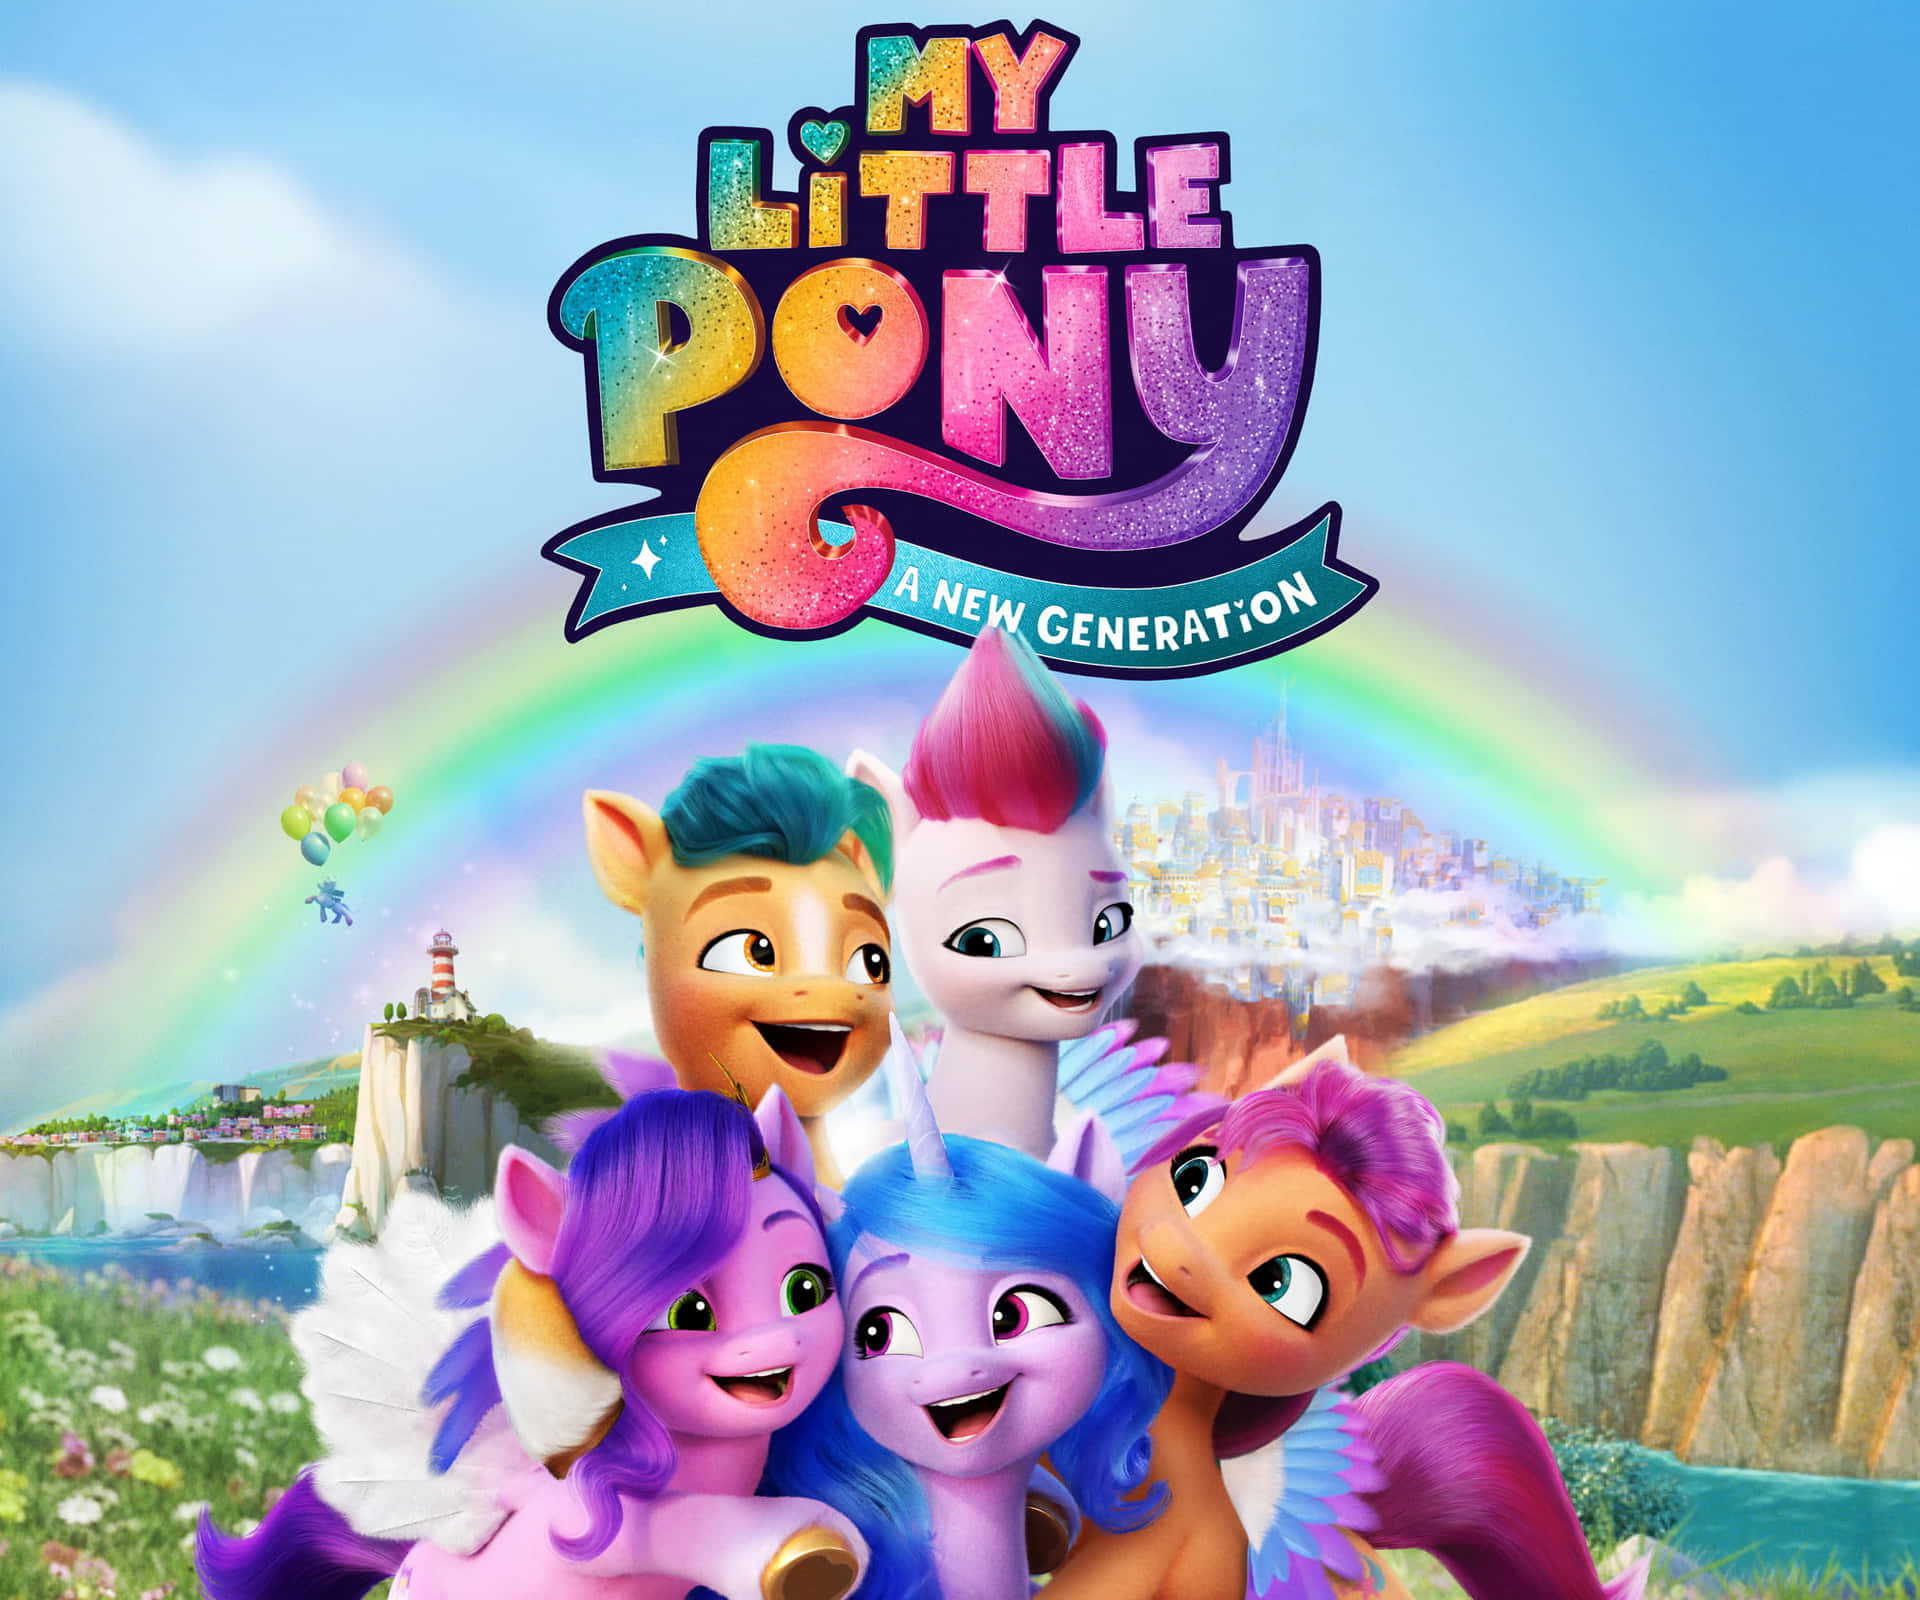 Celebrate Friendship with Your Favorite My Little Pony!